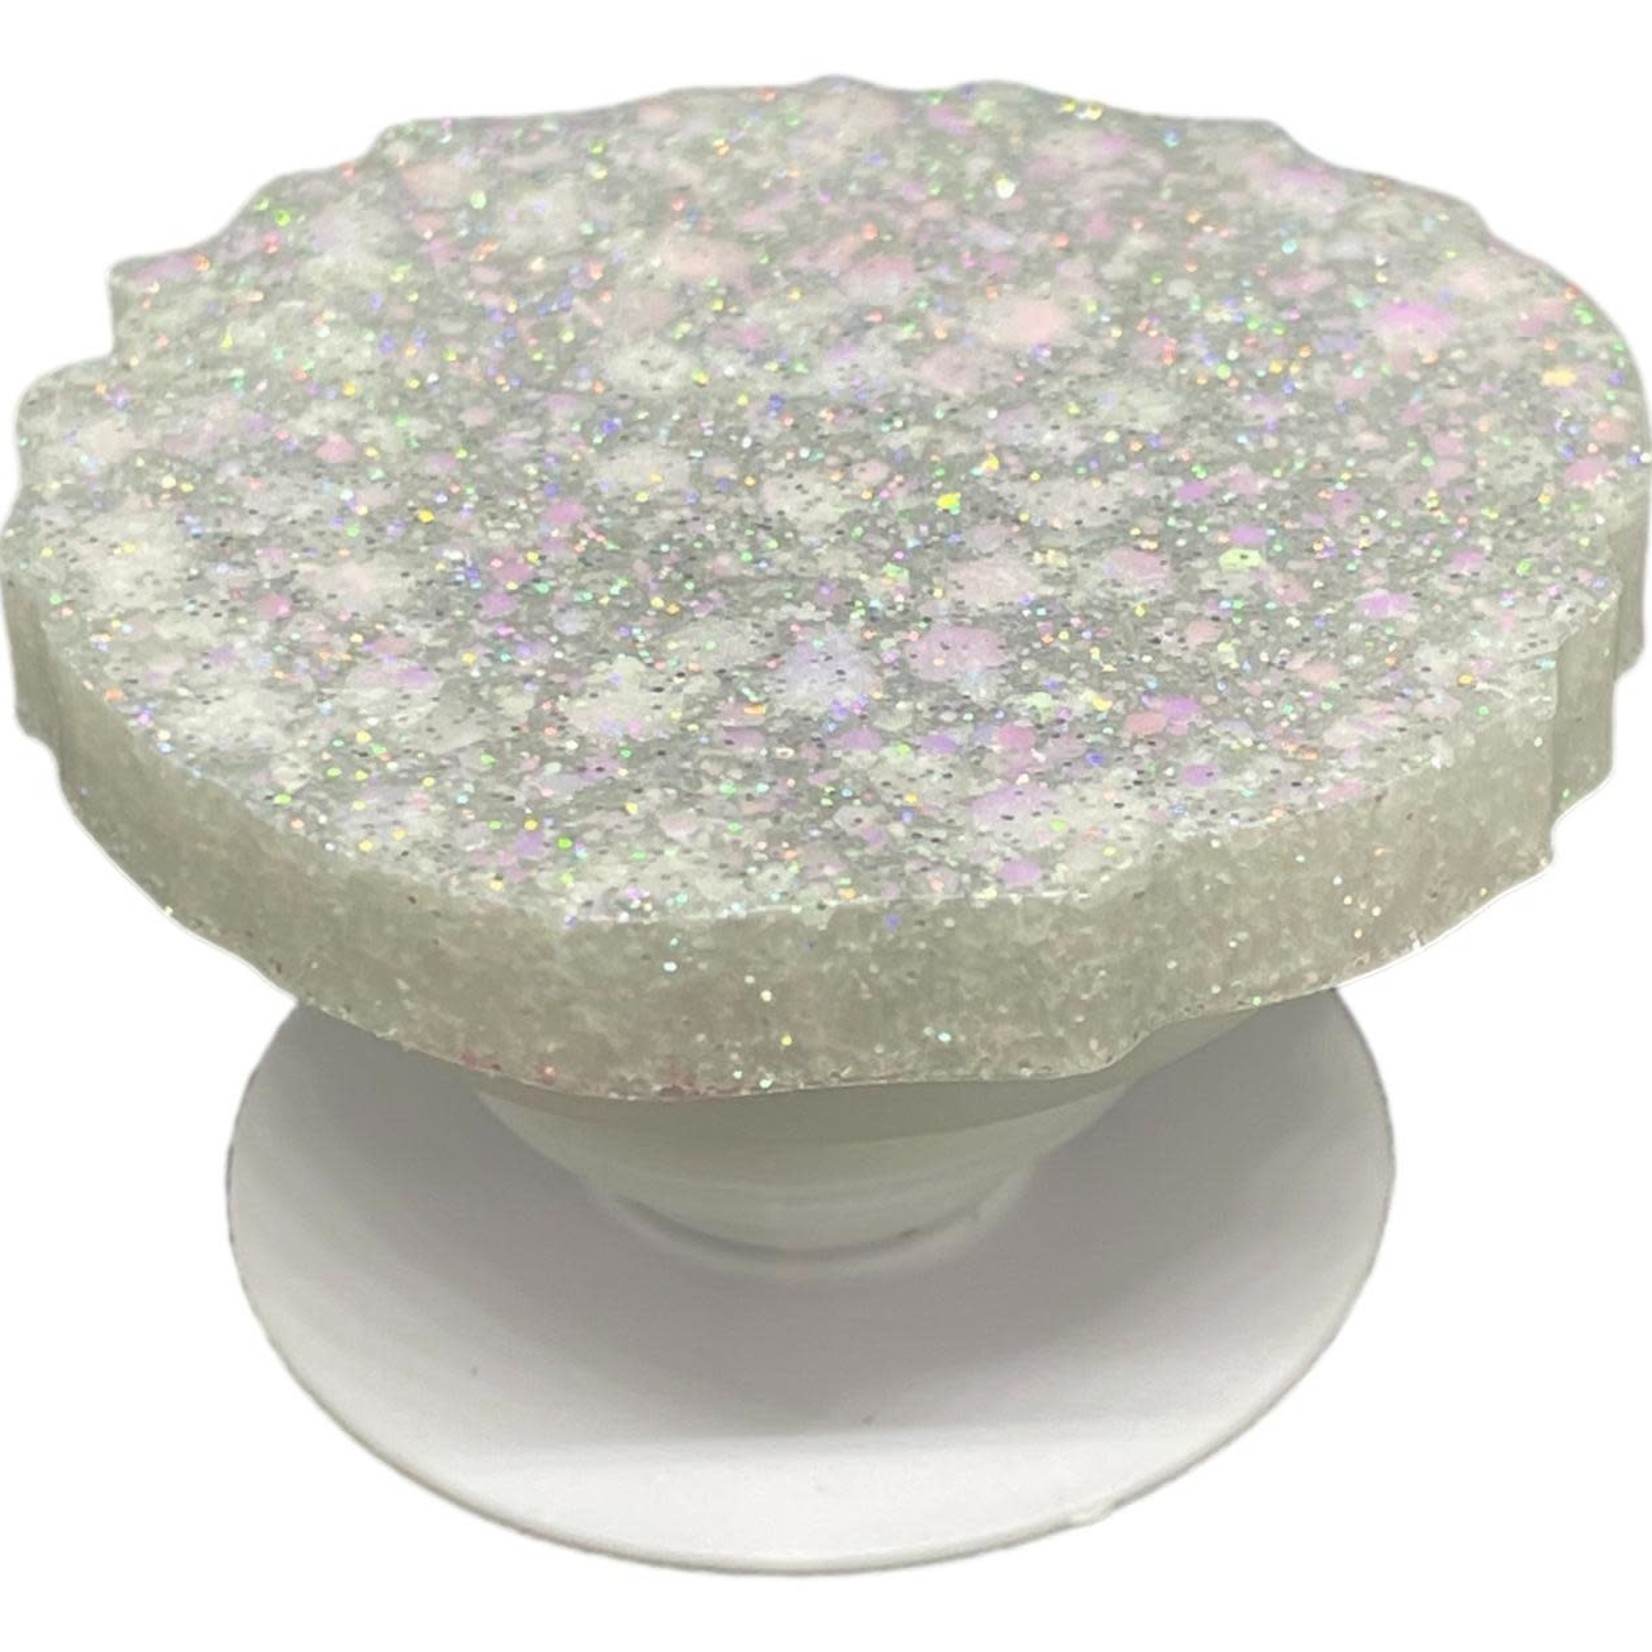 East Coast Sirens Sparkling White Geode-style Phone Grip